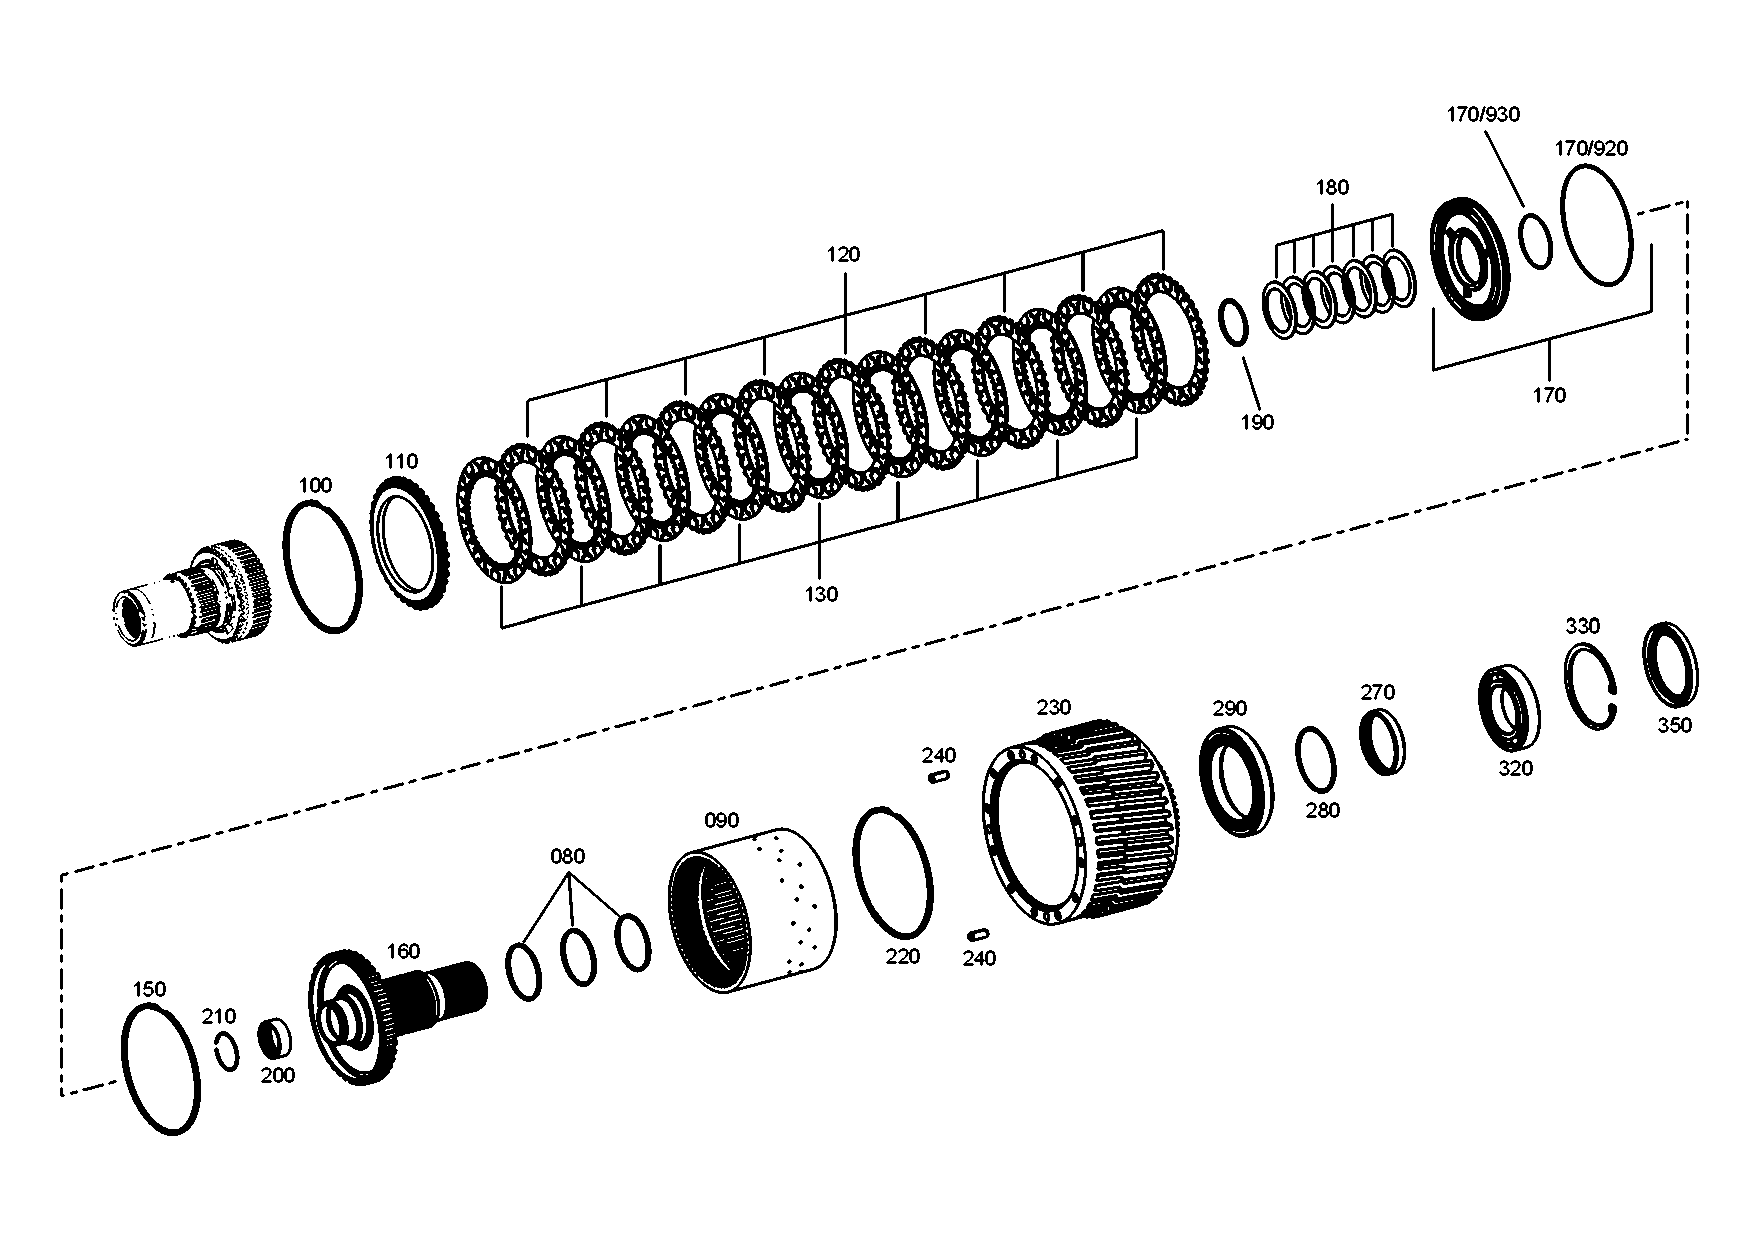 drawing for TITAN GMBH 199118250178 - NEEDLE CAGE (figure 2)